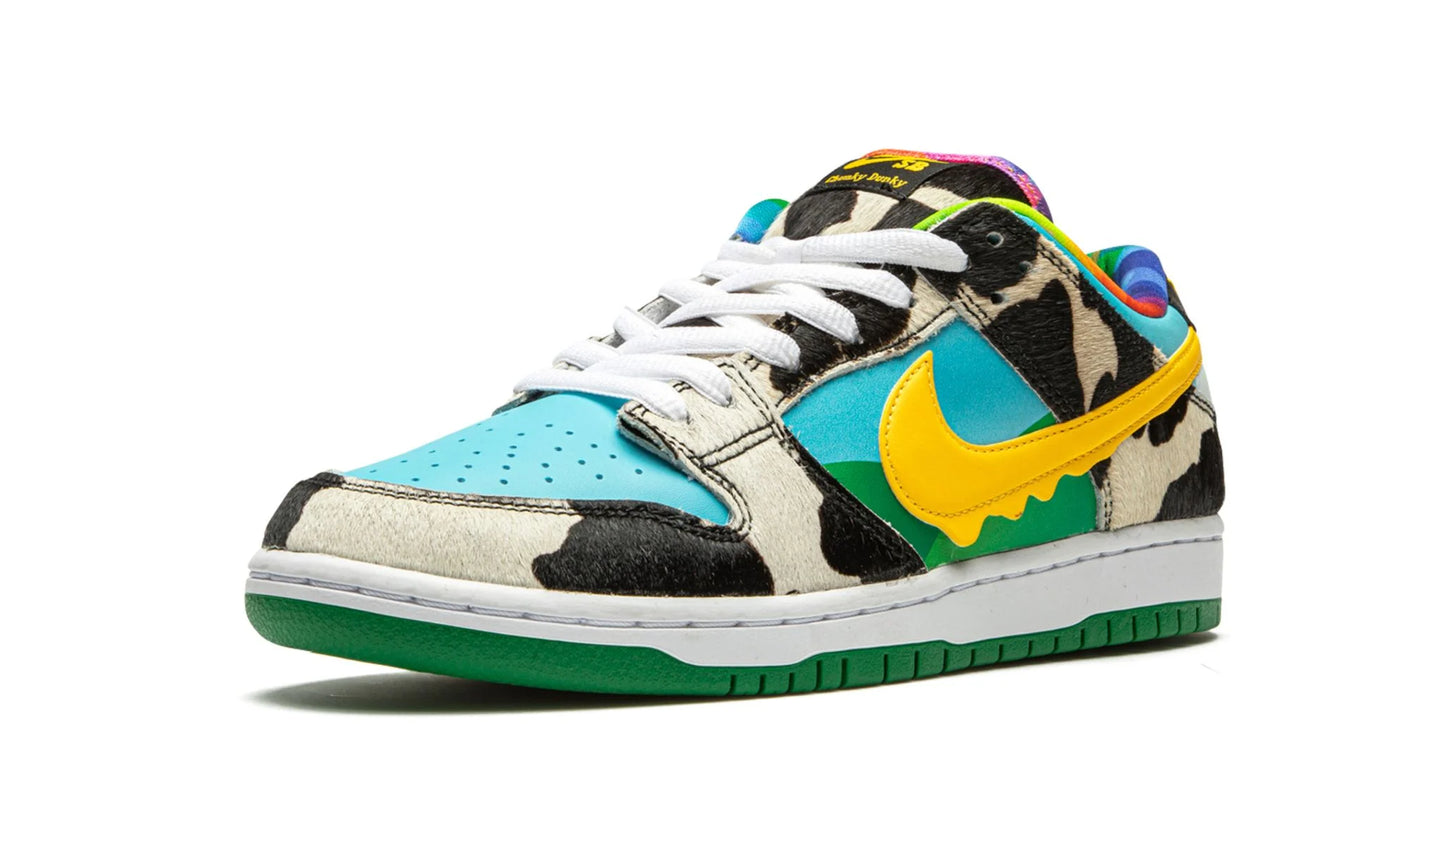 NIKE SB DUNK LOW "Ben & Jerry's - Chunky Dunky"